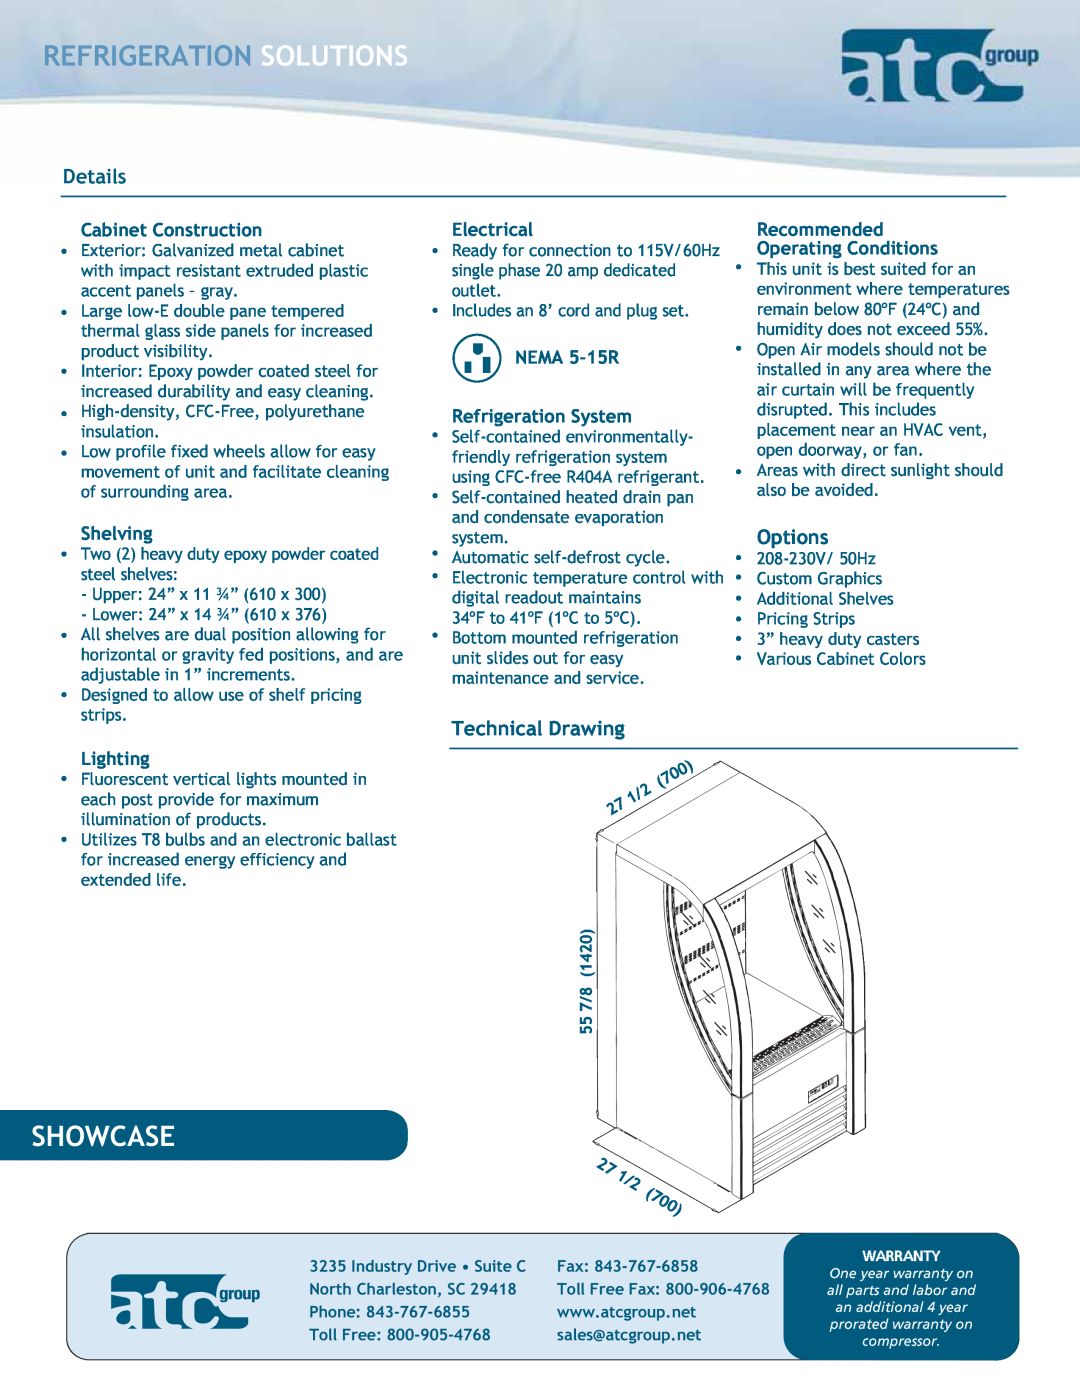 ATC Group SHOWCASE Refrigeration Solutions, Showcase, Details, Options, Technical Drawing, Cabinet Construction, Shelving 